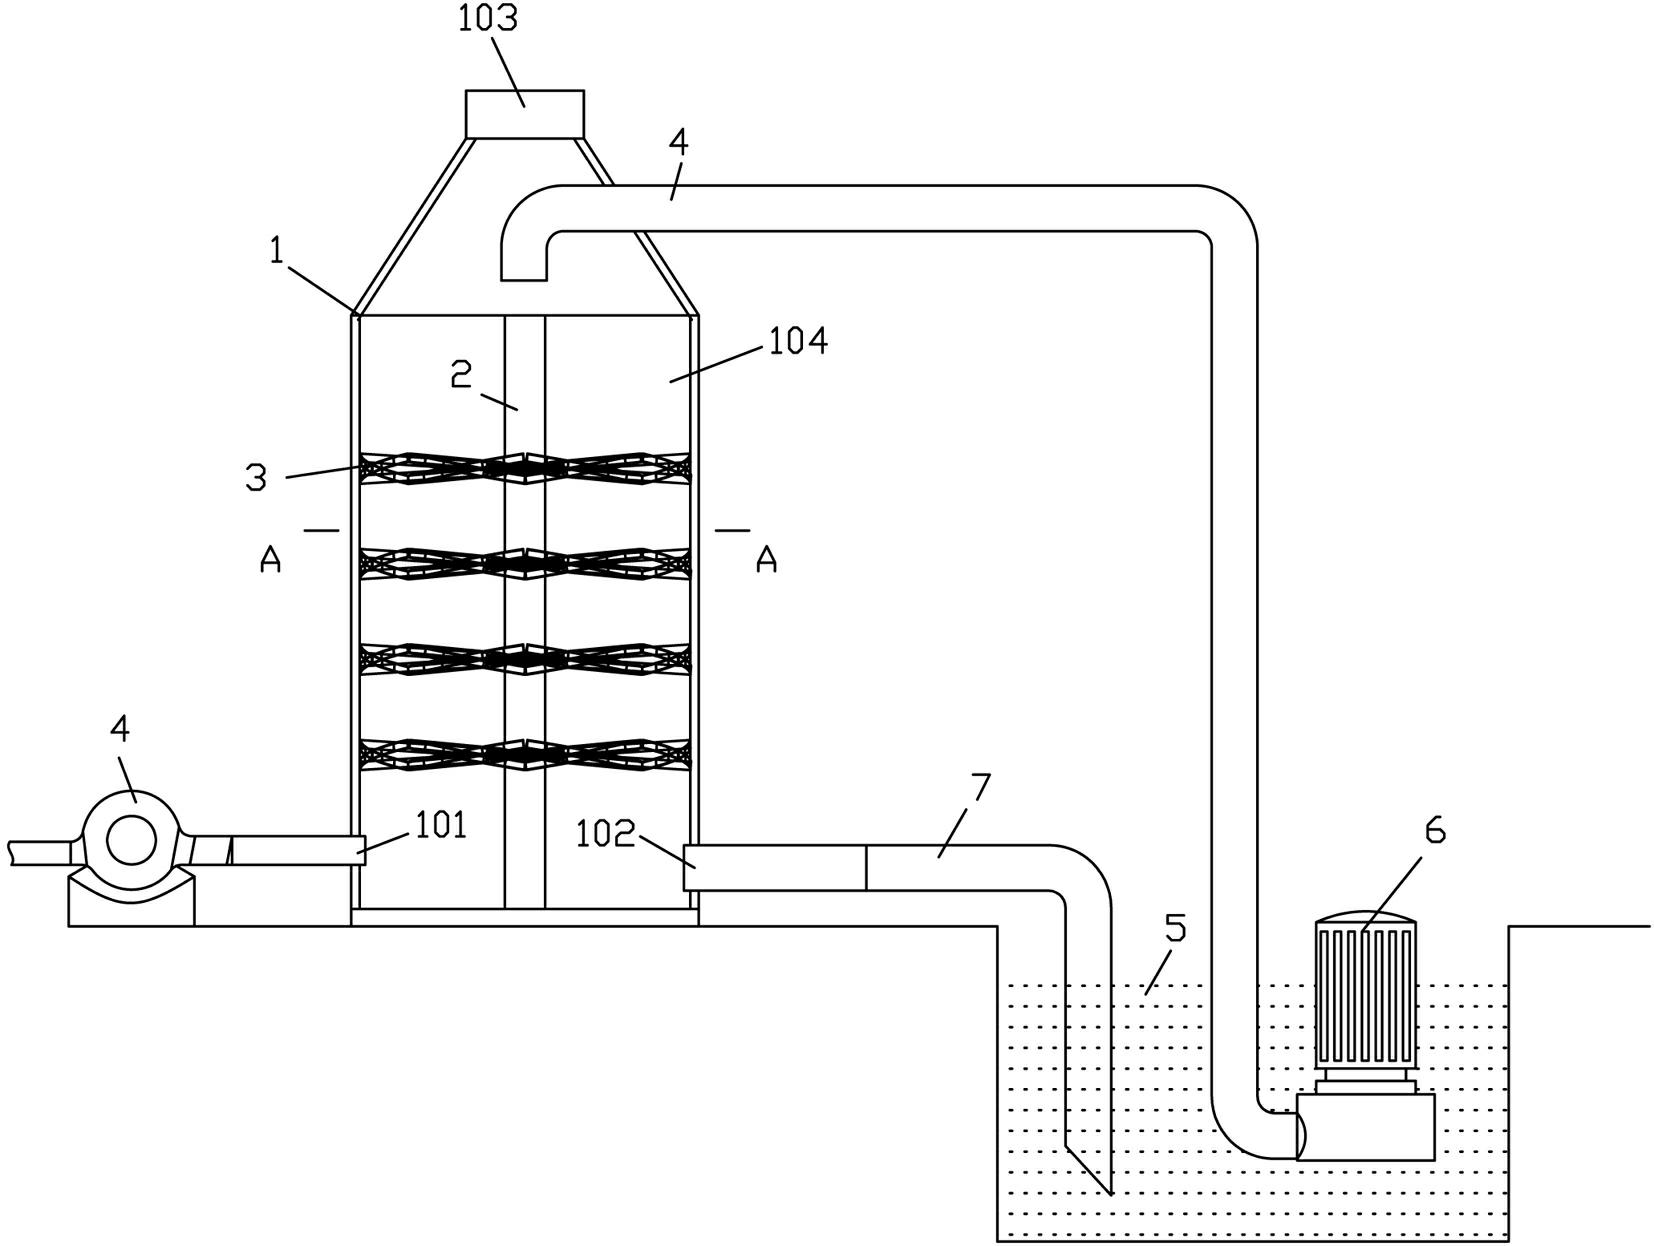 Deduster and method for treating haydite kiln tail gas therewith